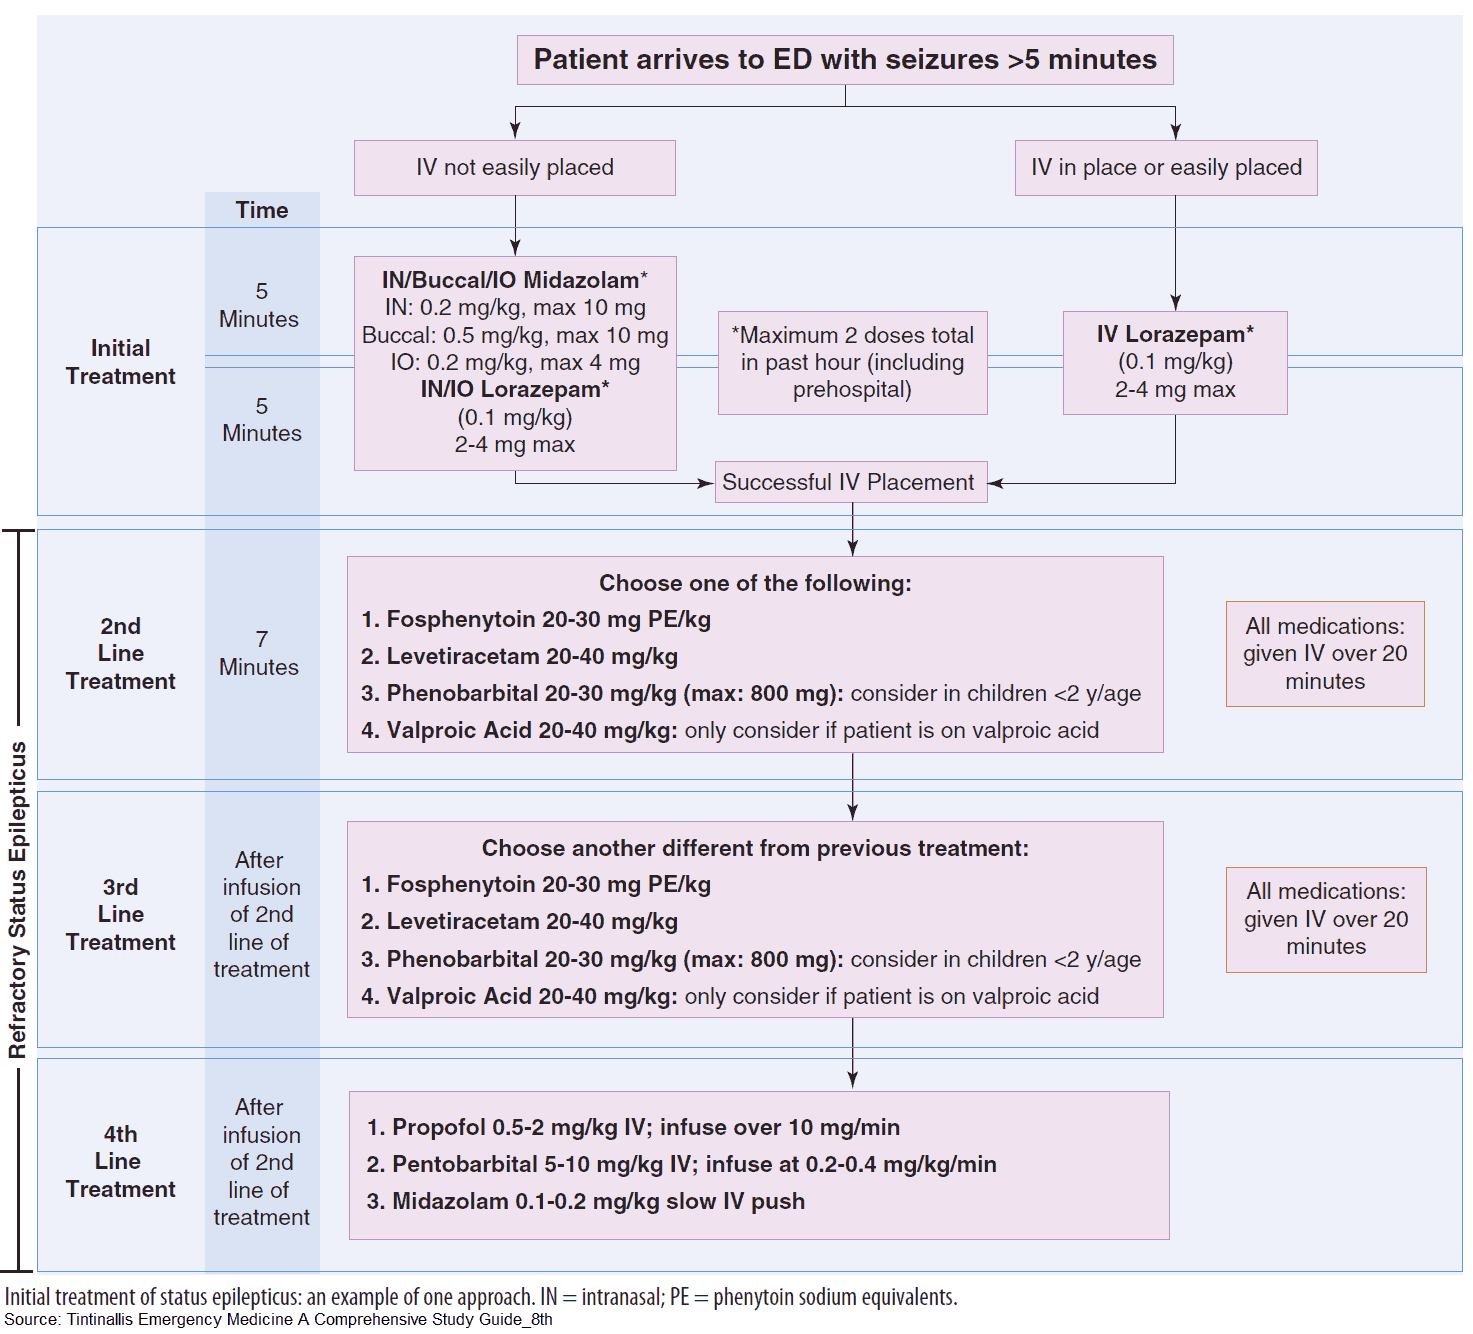 Initial treatment of status epilepticus - an example of one approach